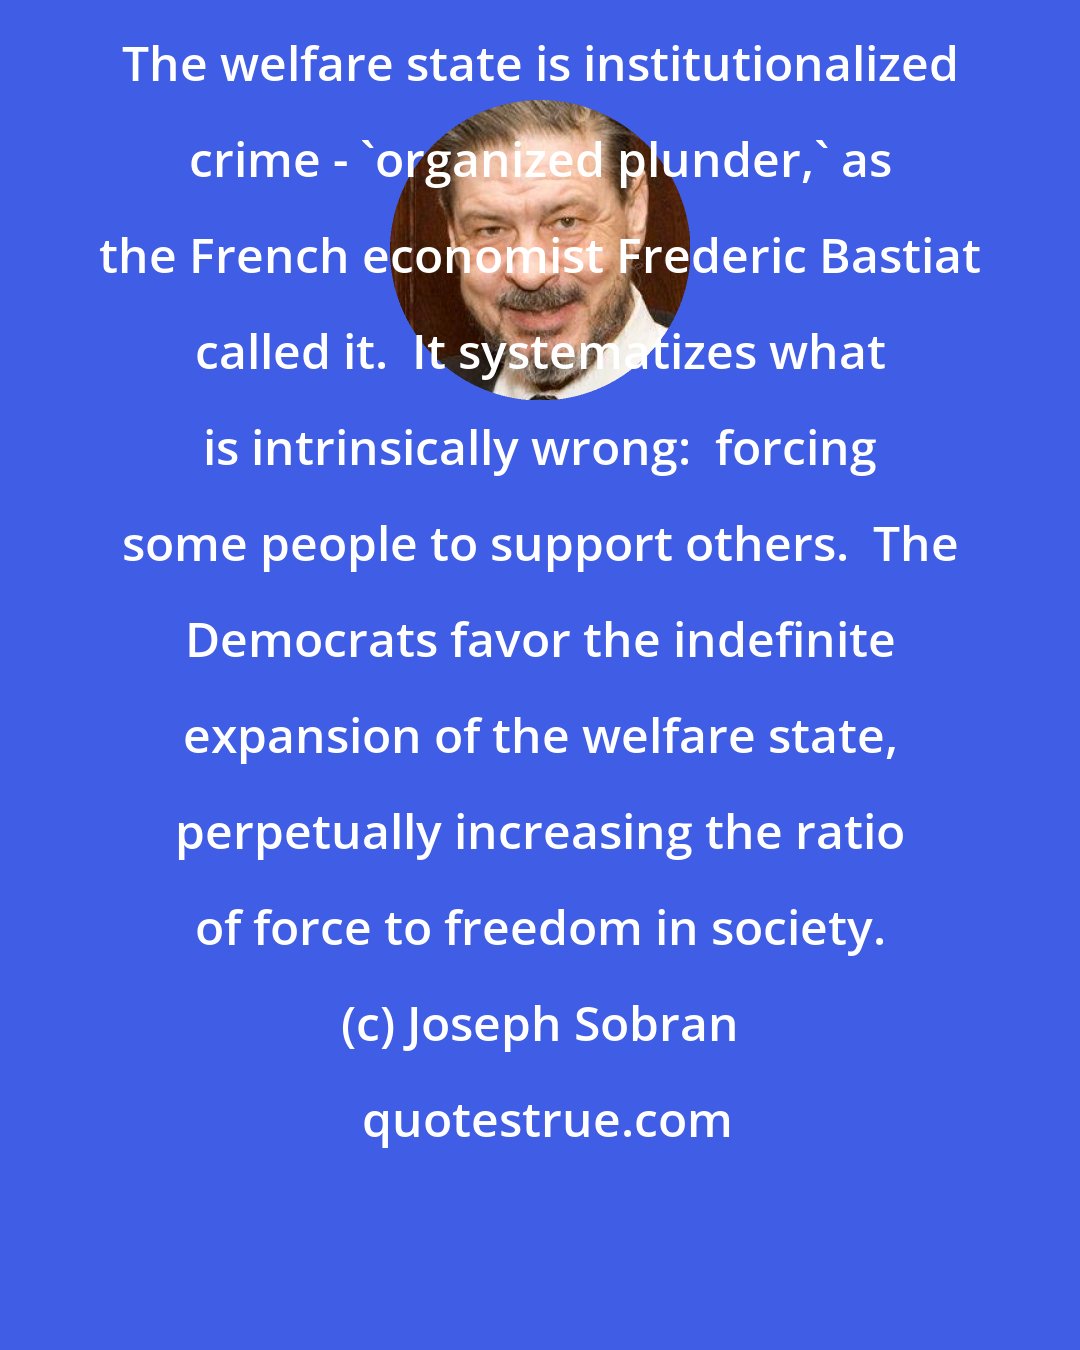 Joseph Sobran: The welfare state is institutionalized crime - 'organized plunder,' as the French economist Frederic Bastiat called it.  It systematizes what is intrinsically wrong:  forcing some people to support others.  The Democrats favor the indefinite expansion of the welfare state, perpetually increasing the ratio of force to freedom in society.